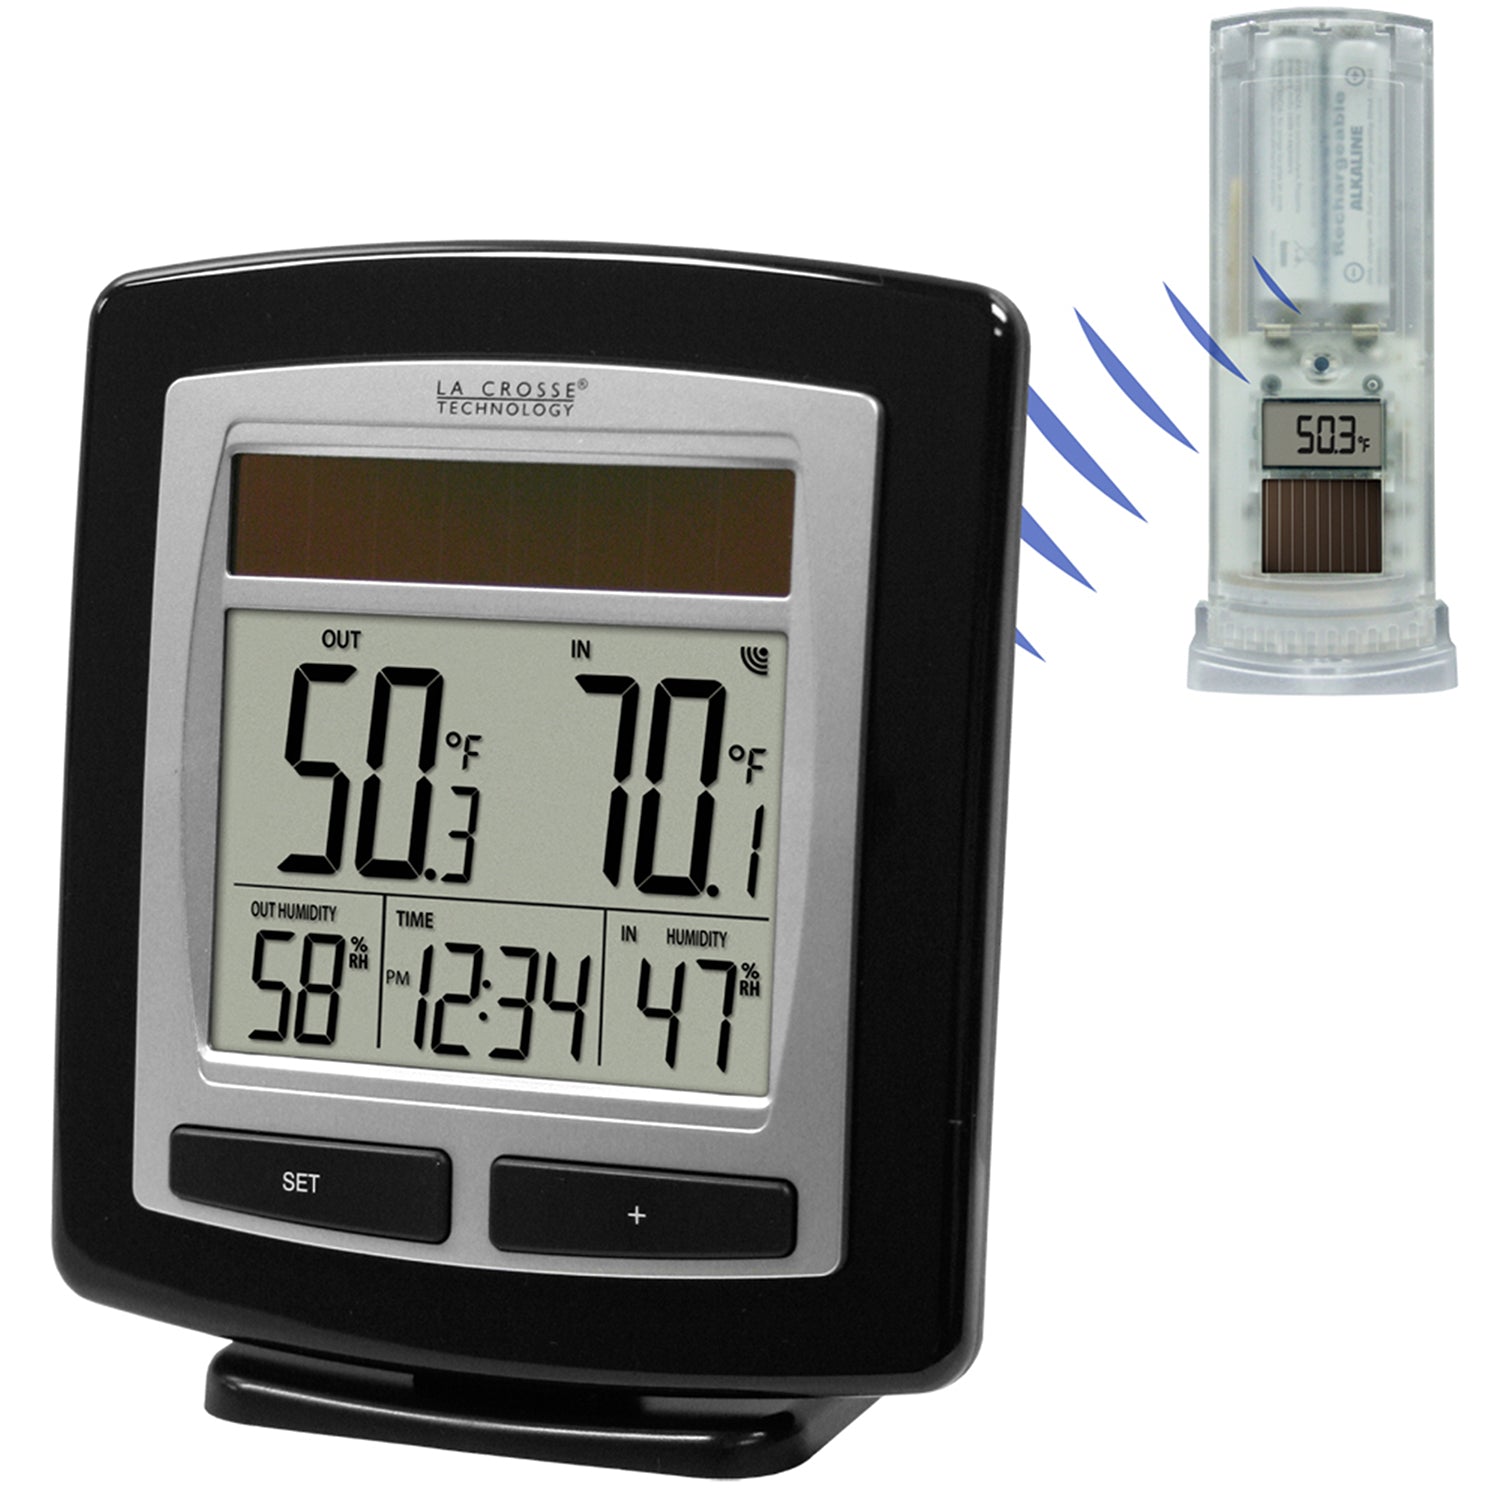 Solar Powered Wireless Humidity/Temperature Station and Sensor by